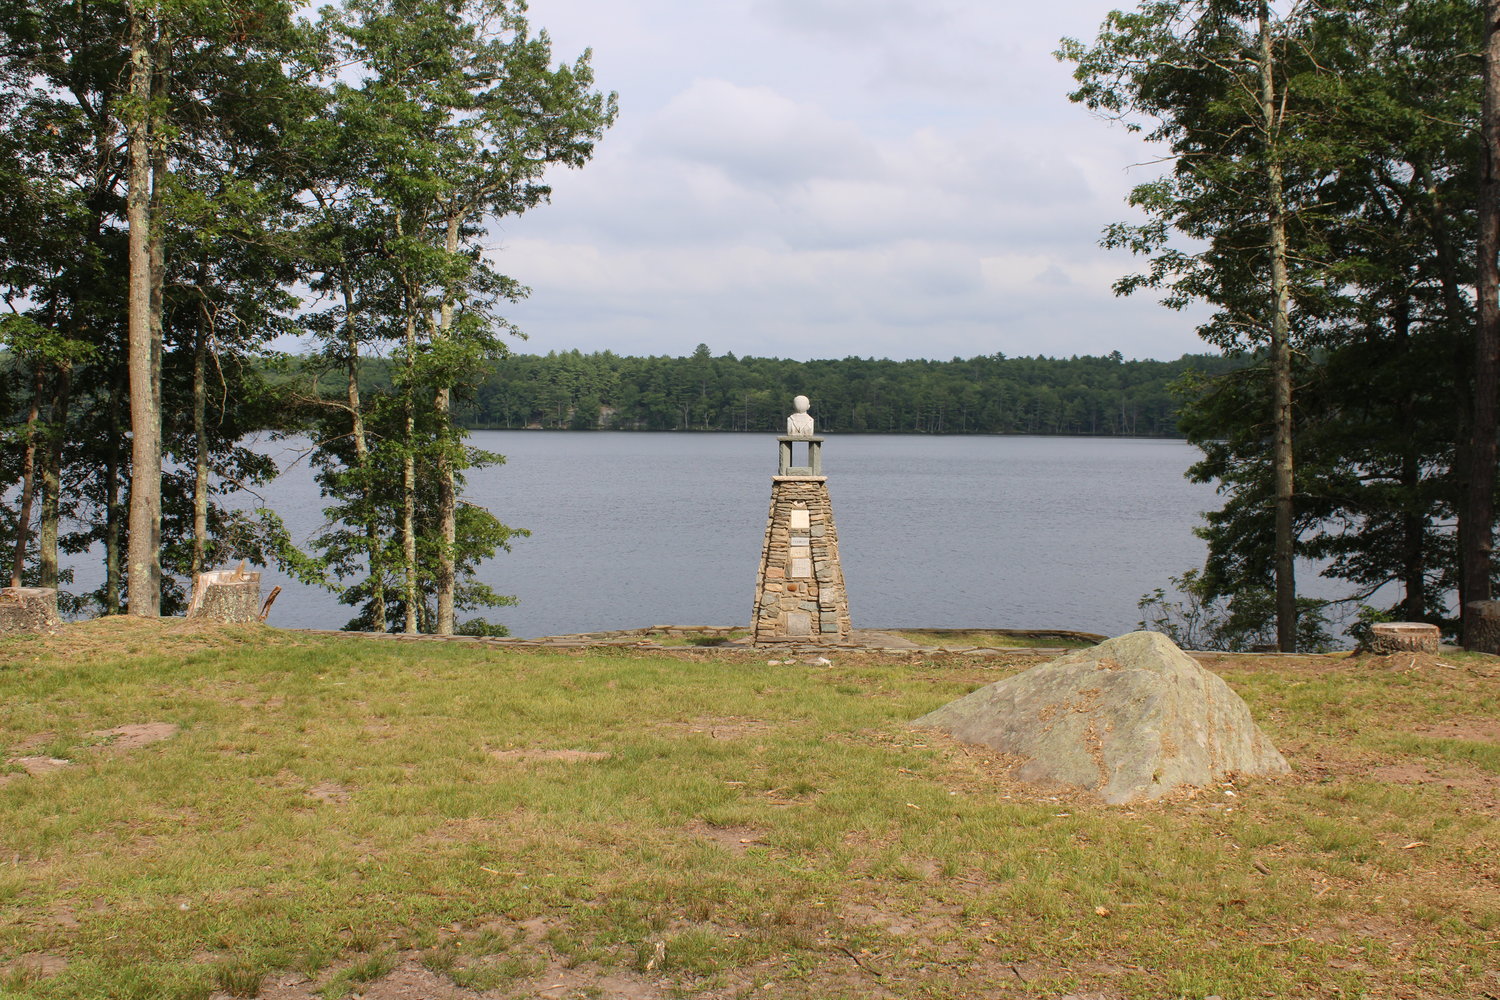 The Tower of Friendship Monument, overlooking the water.